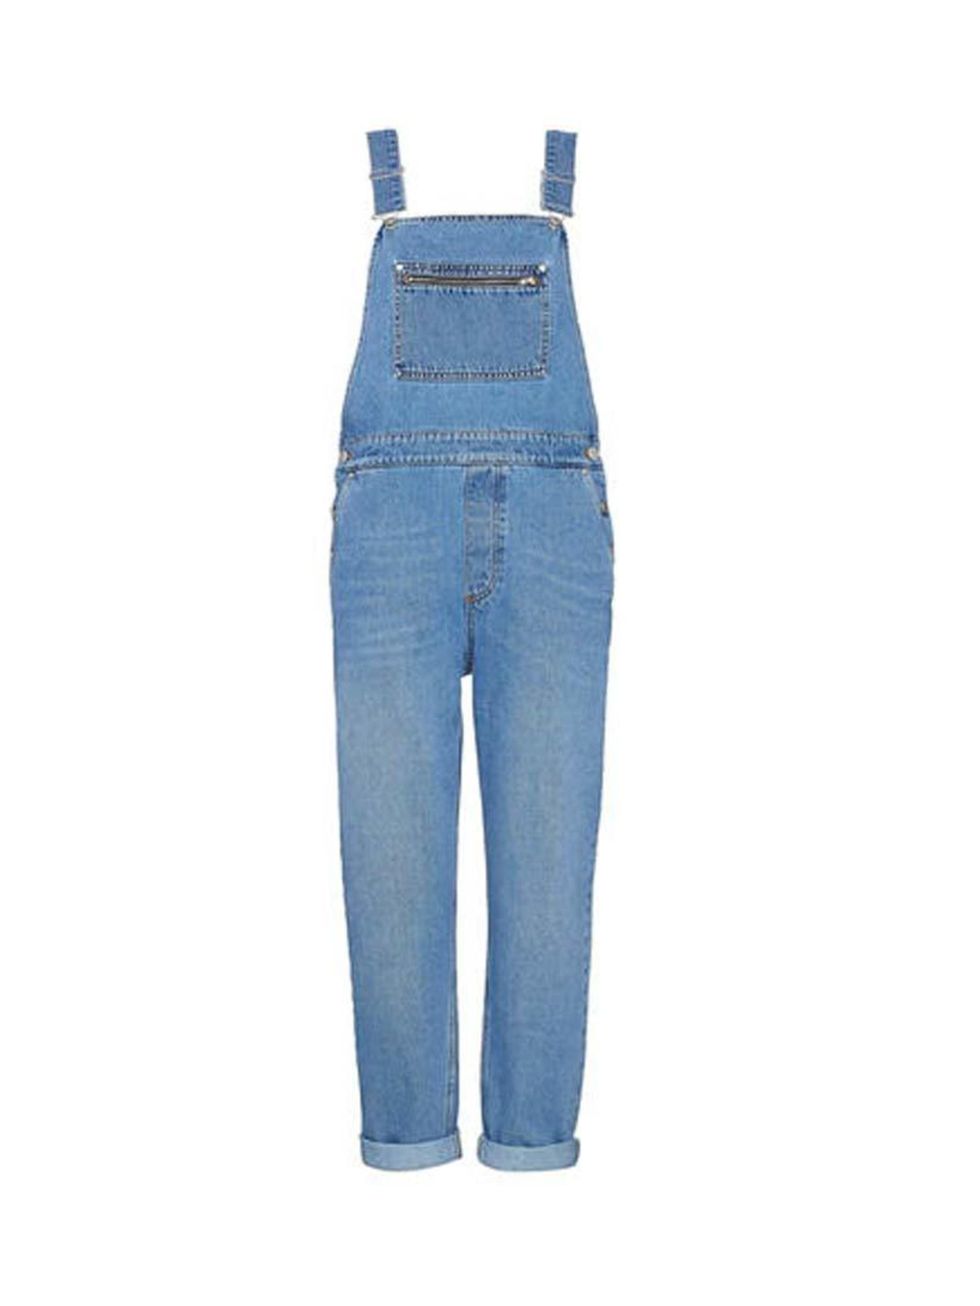 <p>Could these be the perfect denim dungarees? Acting Commissioning Editor Georgia Simmonds will report back. </p>

<p><a href="http://www.whistles.com/women/clothing/jeans/slim-denim-dungarees-20093.html?dwvar_slim-denim-dungarees-20093_color=Denim#" tar